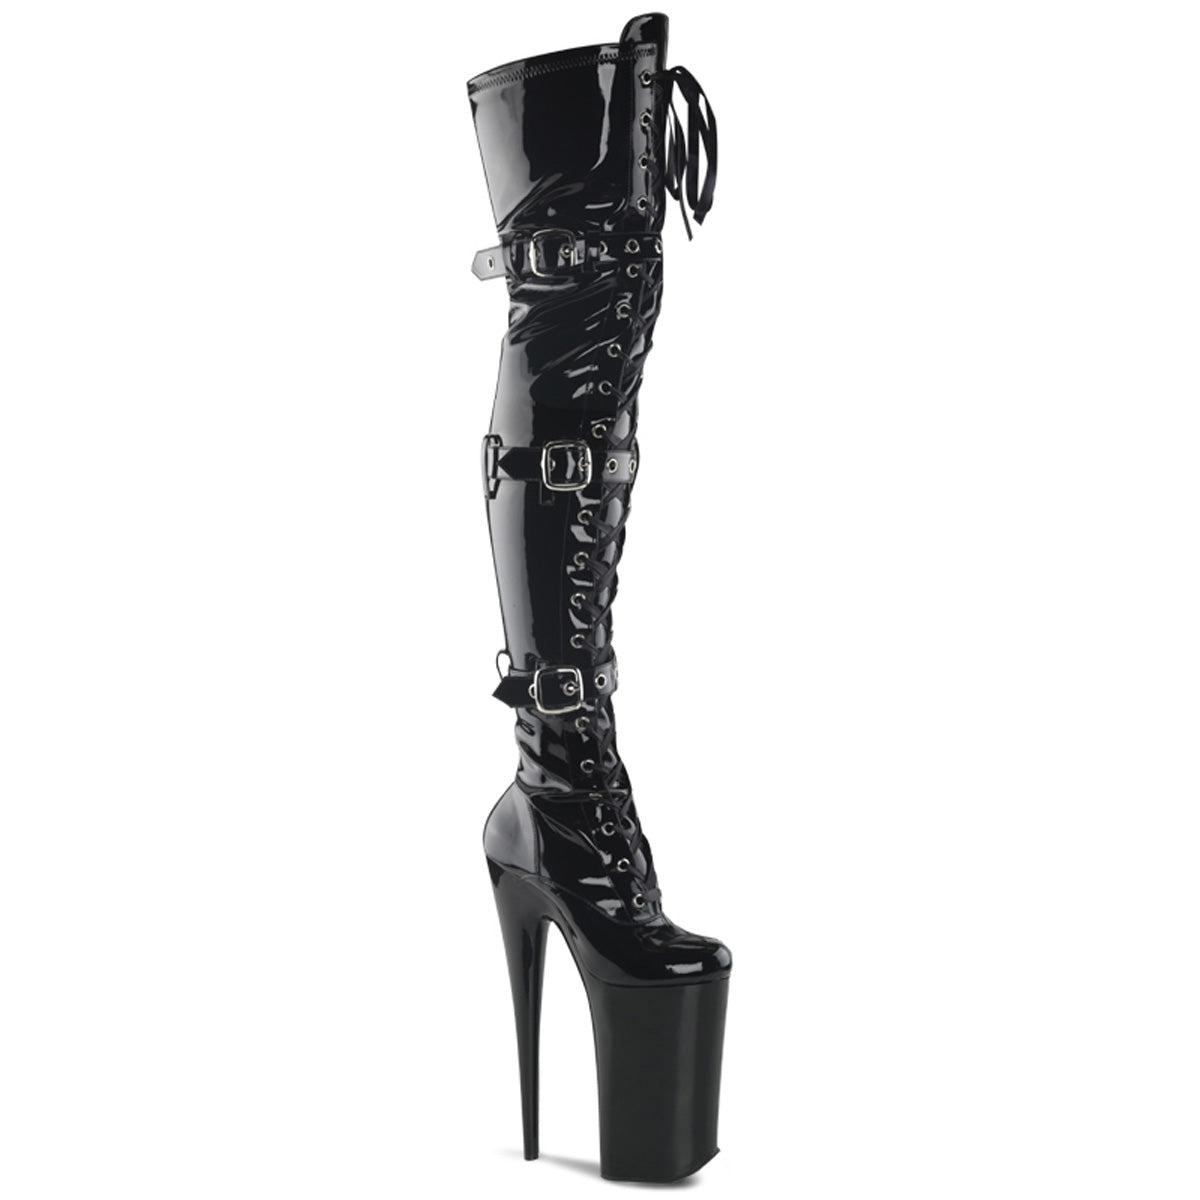 BEYOND-3028 Sexy 10" Heel Black Patent Strippers Boots